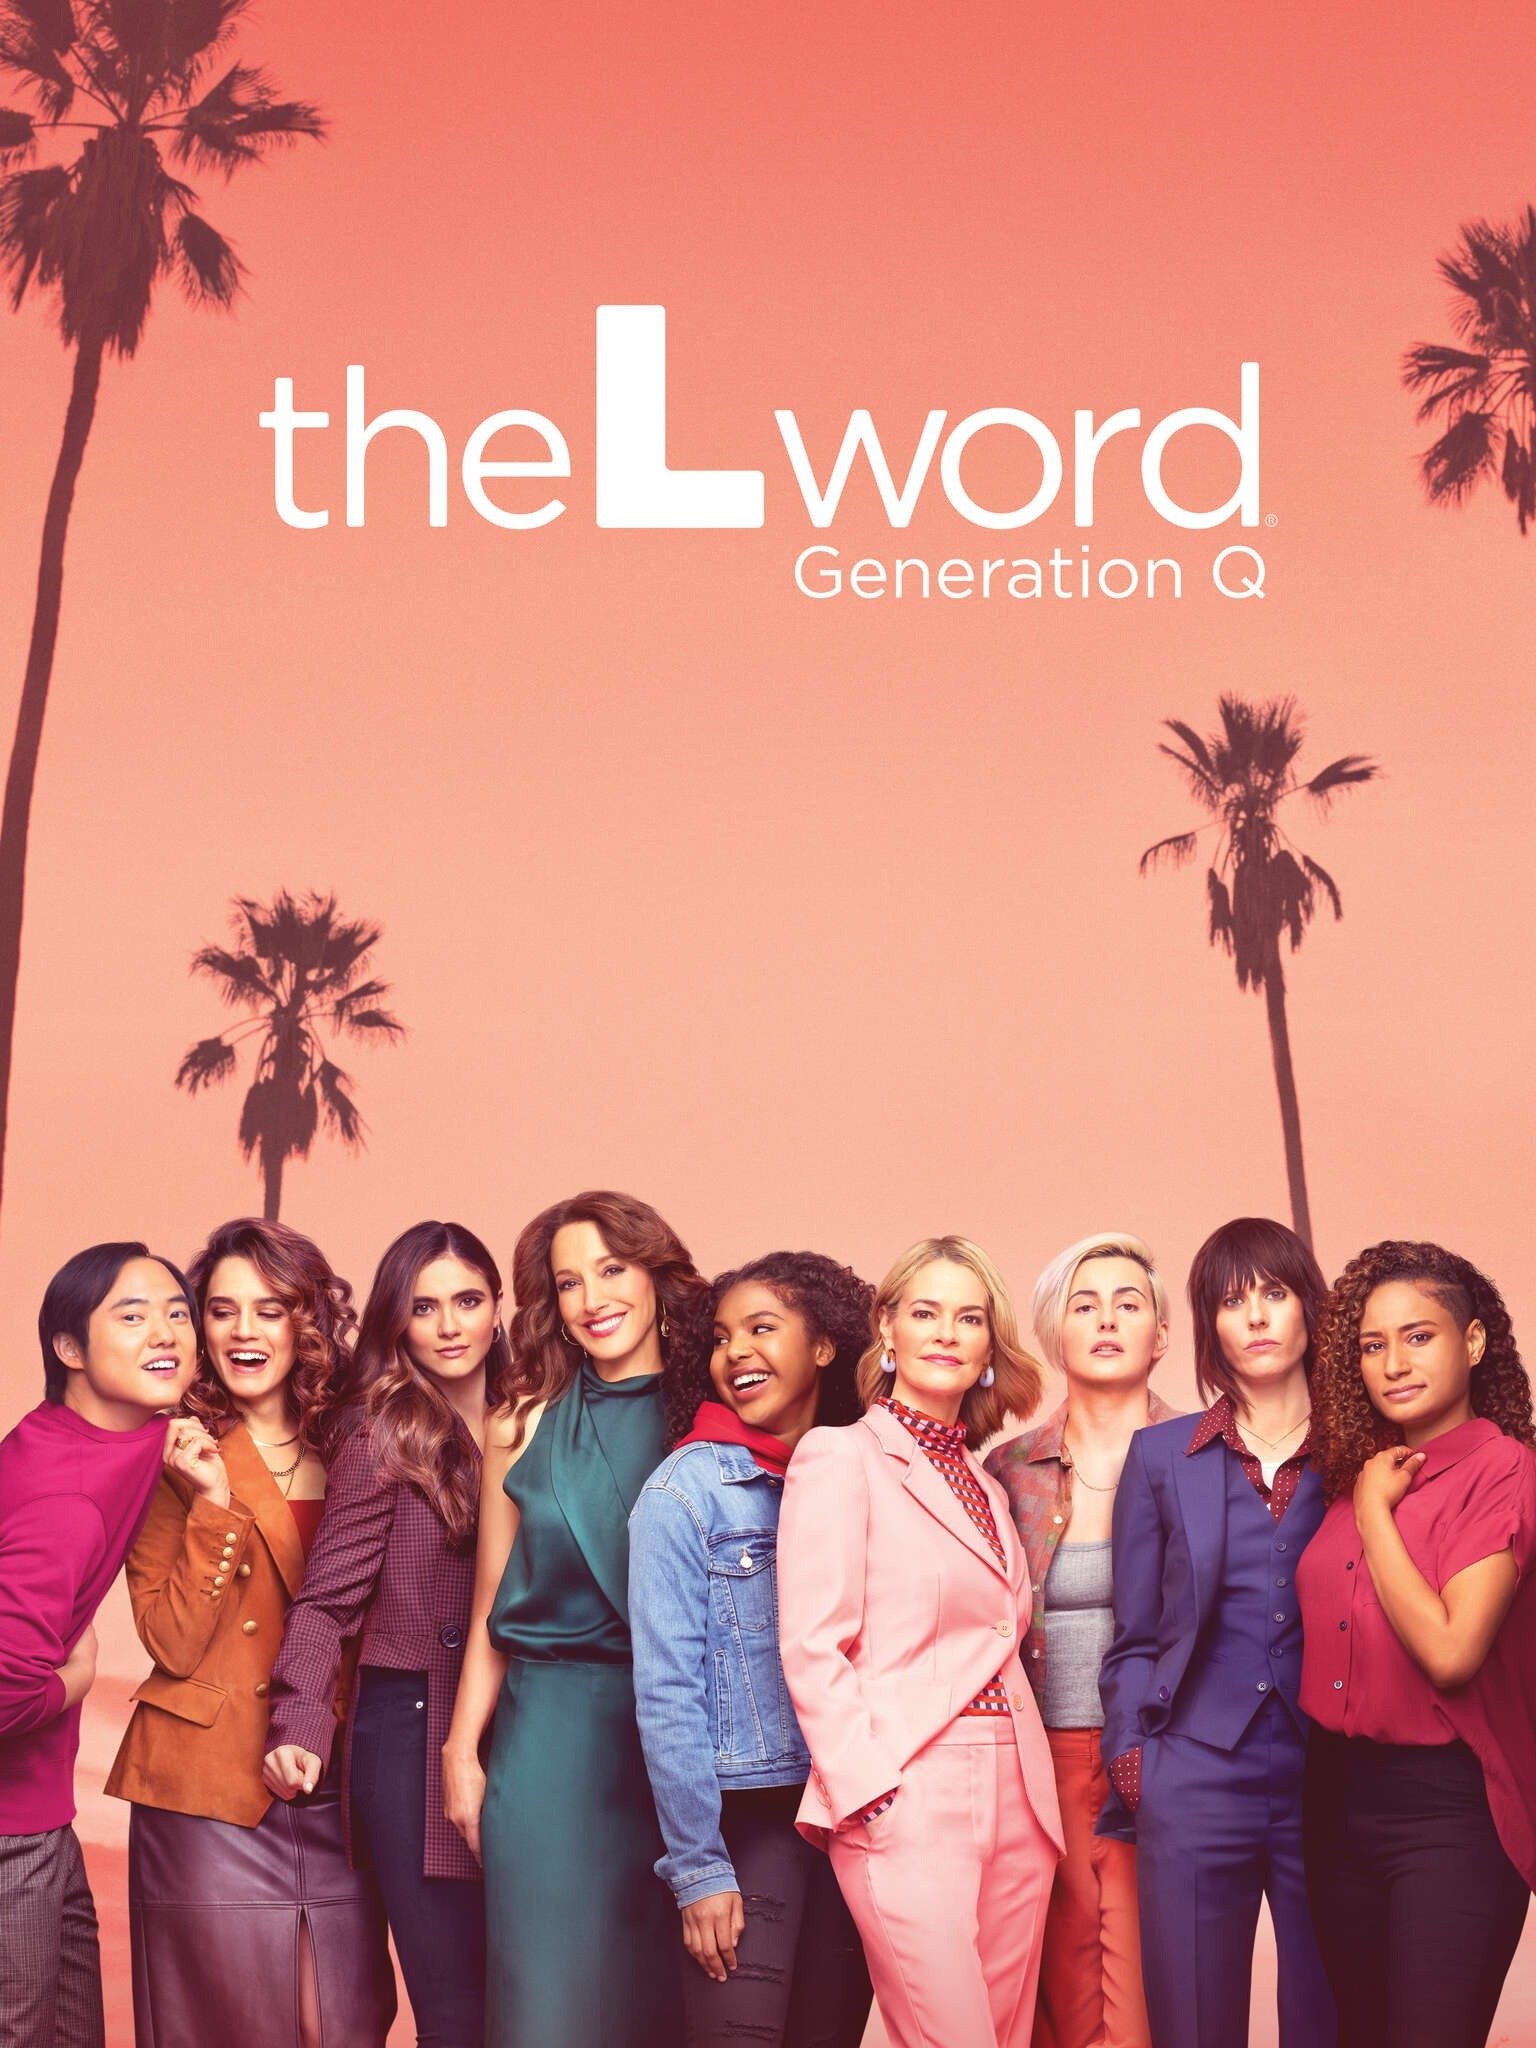 The L Word sequel being developed at Showtime